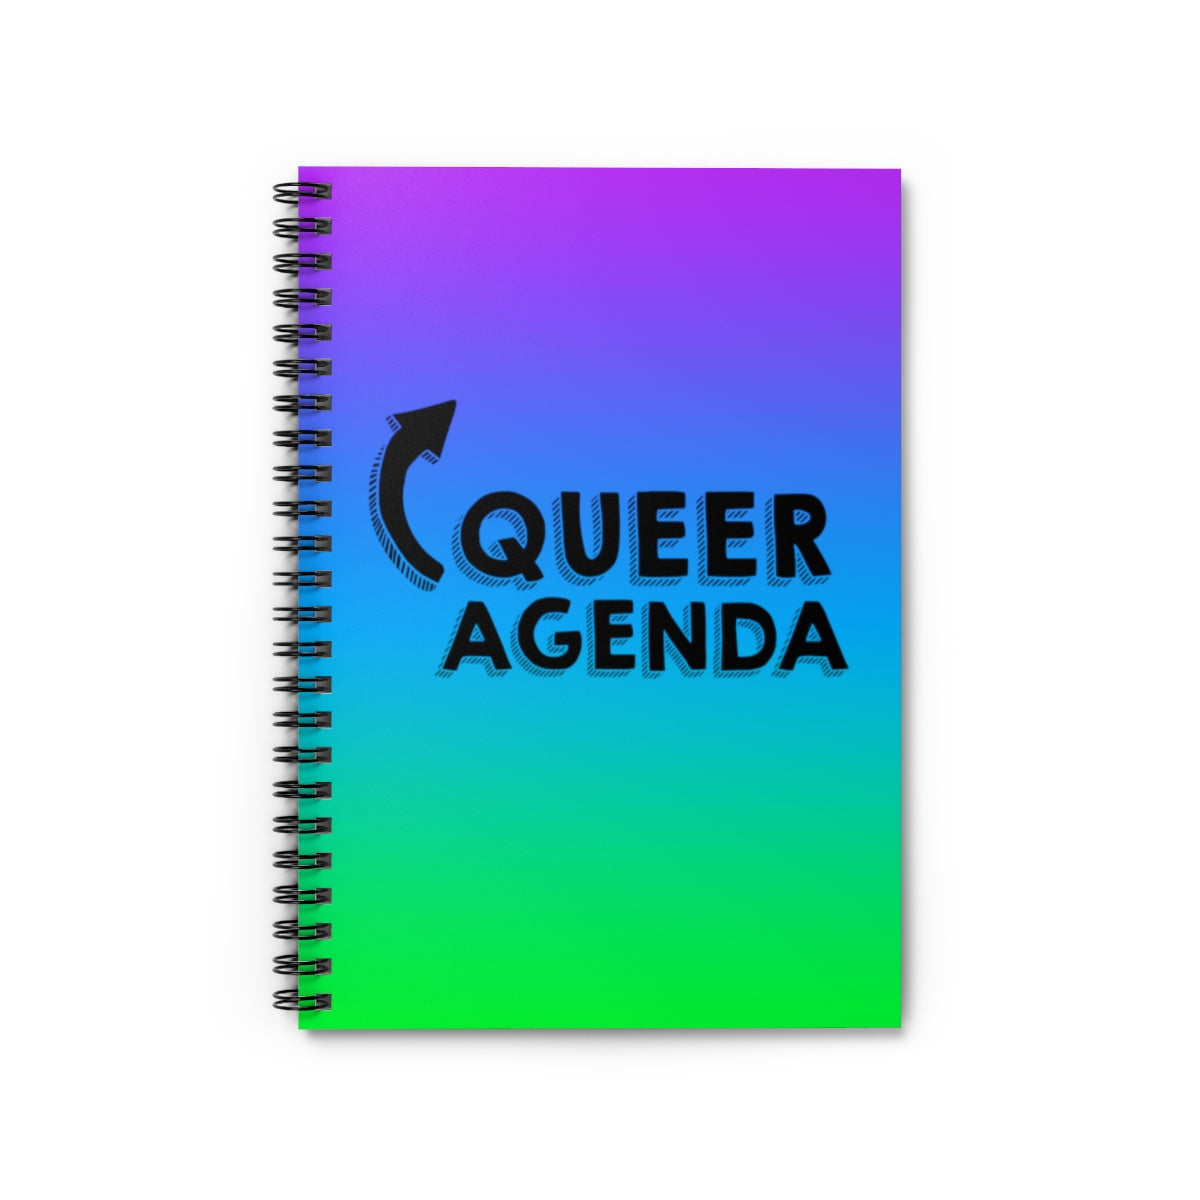 Queer Agenda Spiral Notebook - Purple, Blue, Green - LGBTQIA+, Paper products, HEED THE HUM